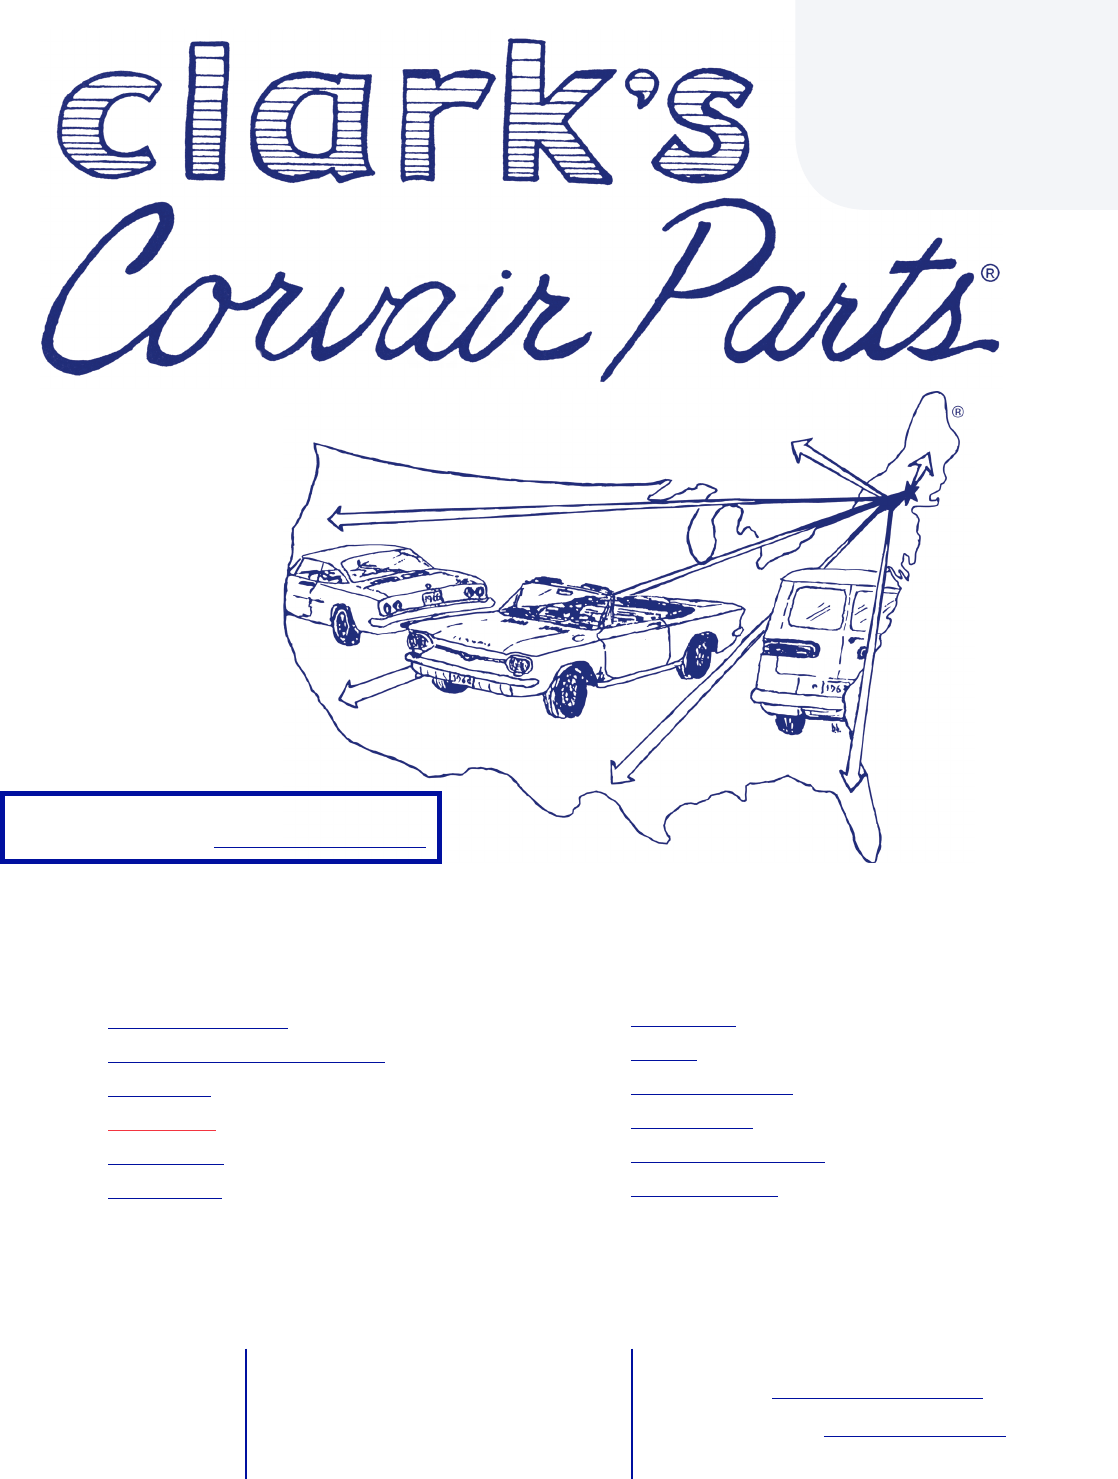 Clark's Corvair Parts, Inc. - Corvair Parts Catalog - Over 12,000 - pg FRONTCOVER